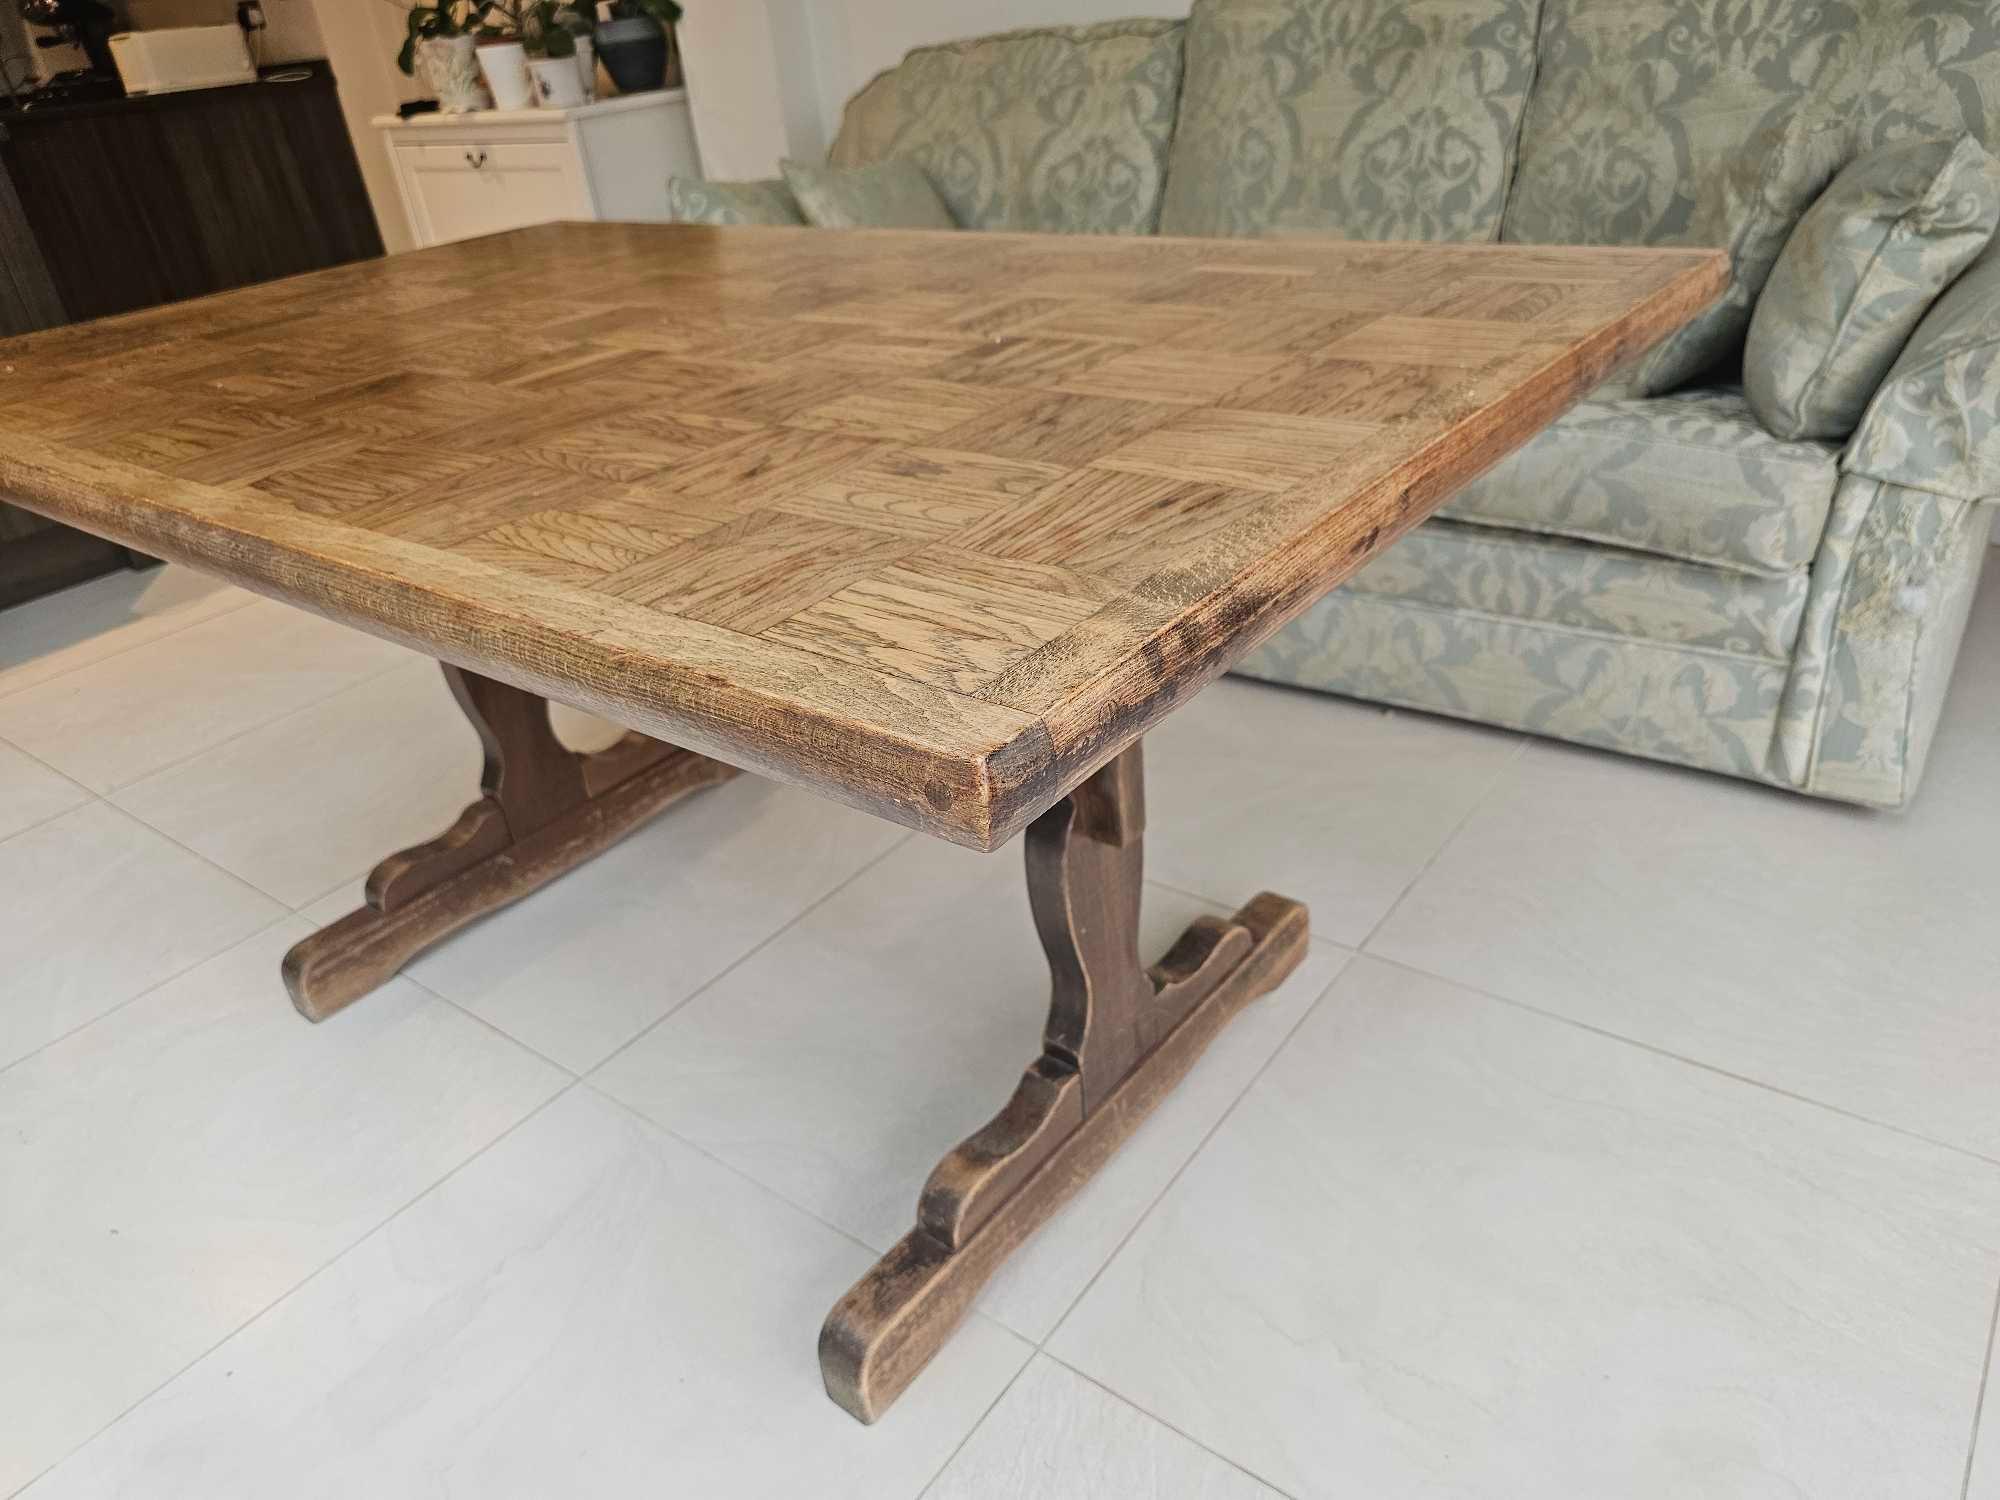 An Oak Trestle Dining Table With Parquetry Lattice Top 150 X 92 X 74cm - Image 5 of 5